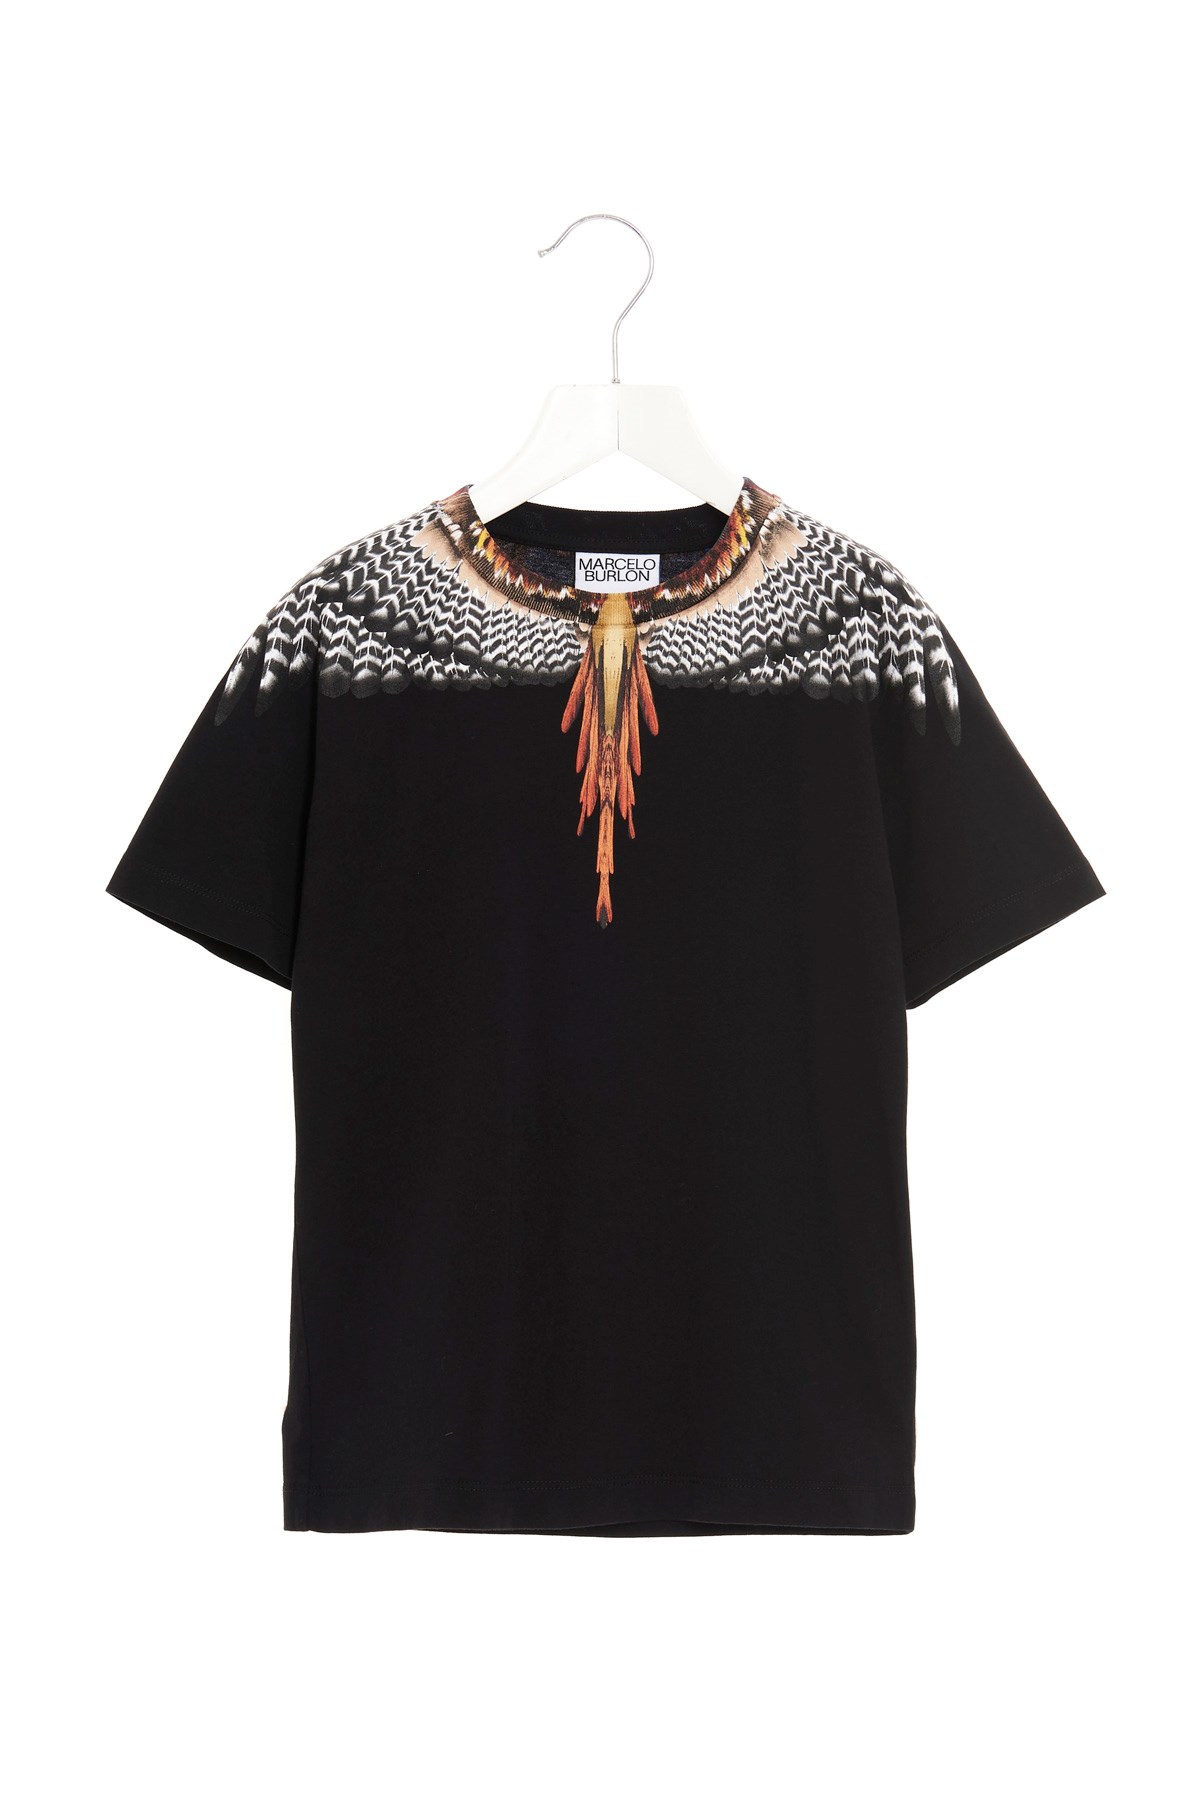 MARCELO BURLON - COUNTY OF MILAN 'Black Grizzly Wings' T-Shirt